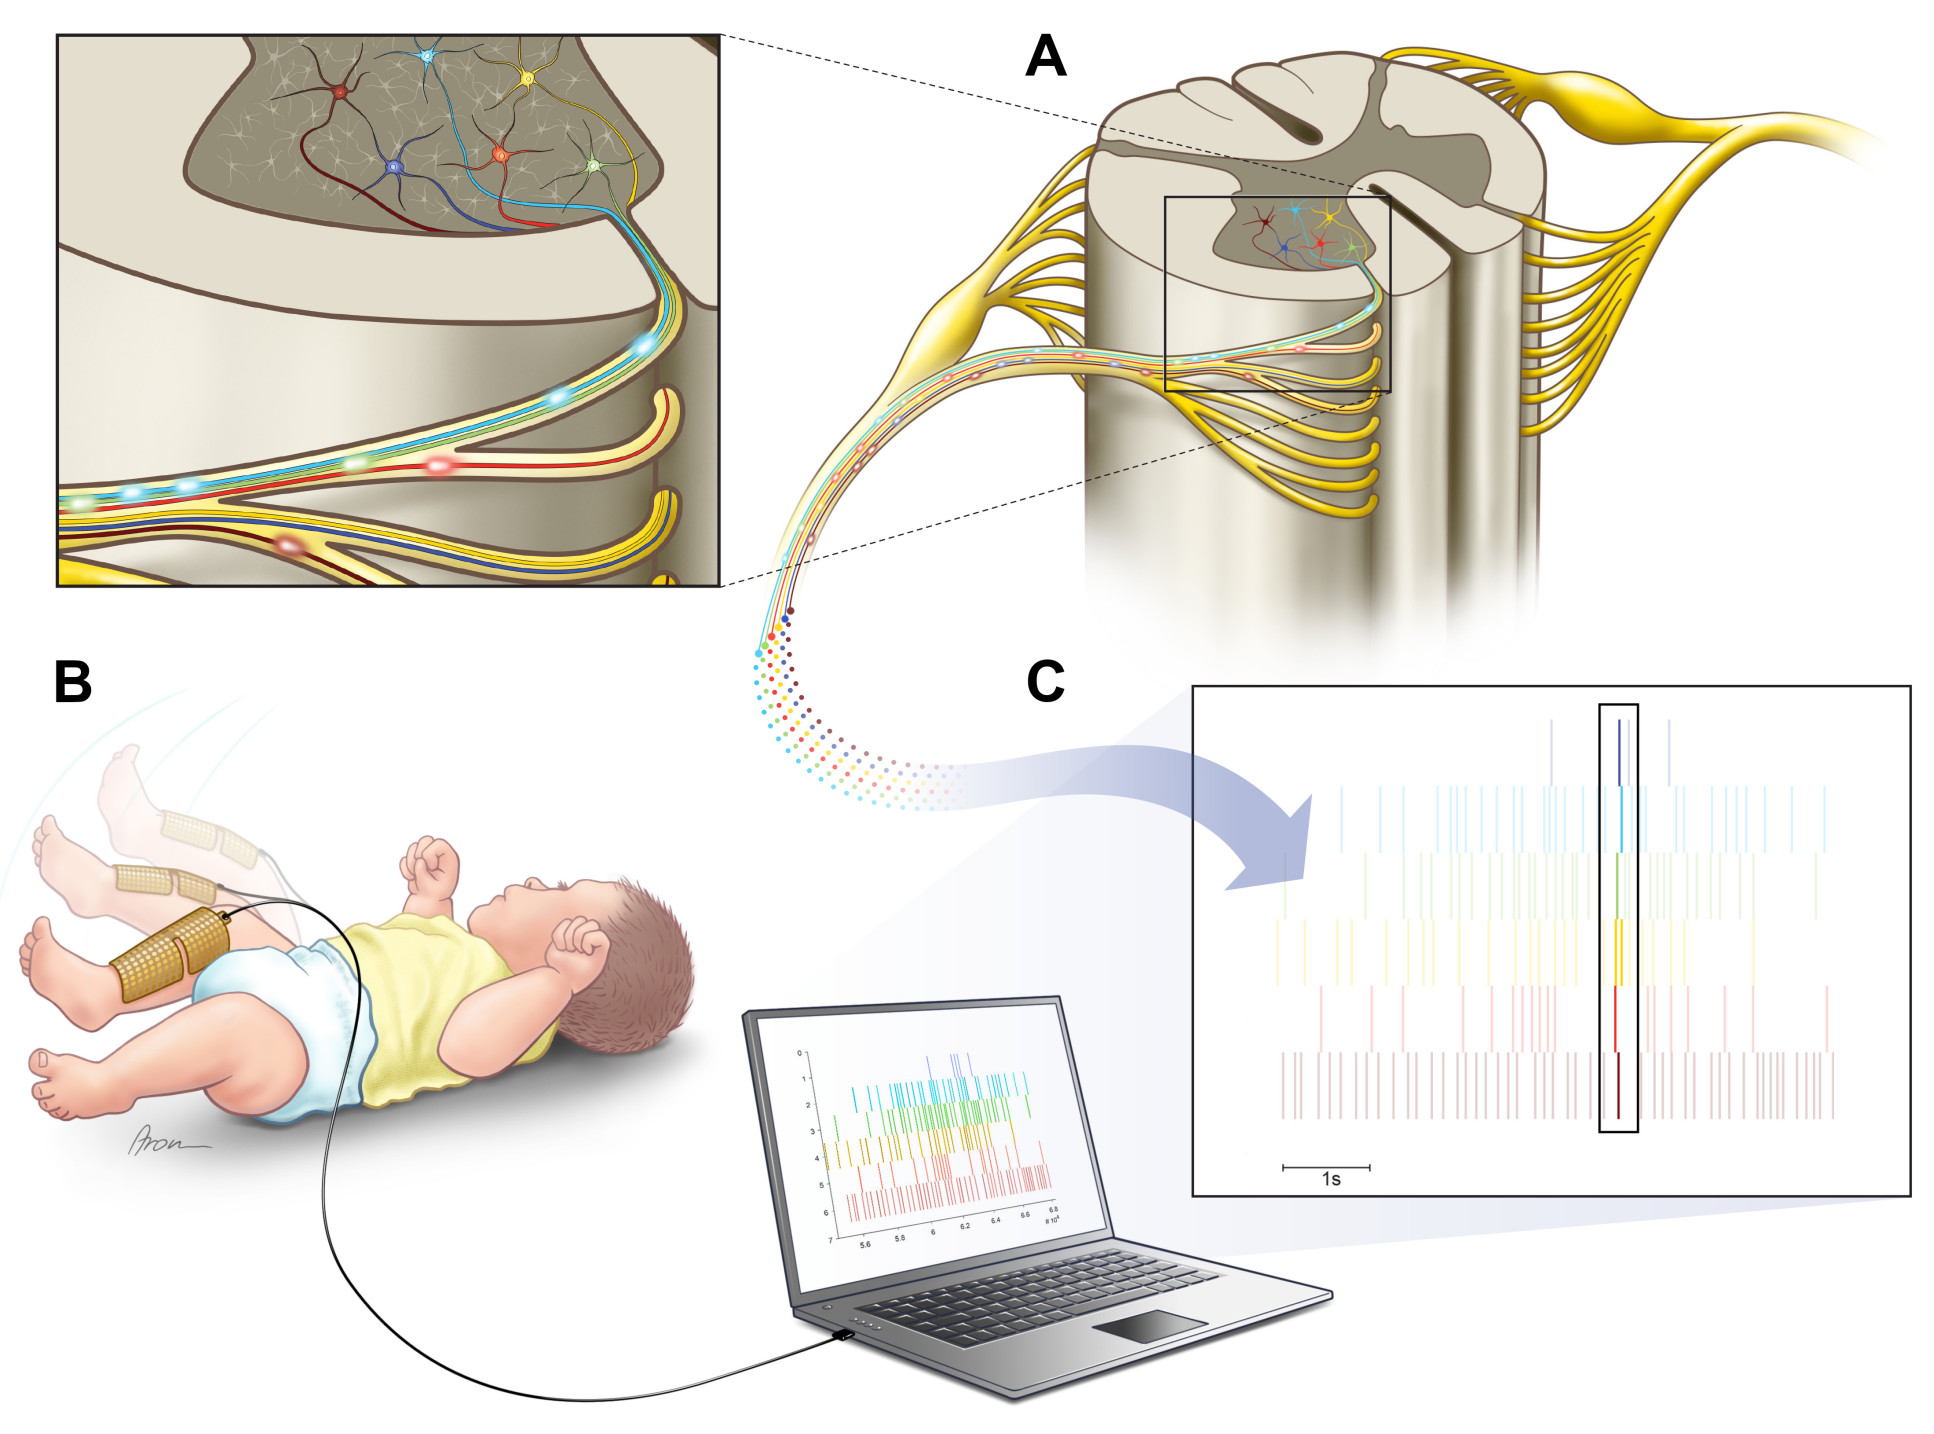 Diagram showing spinal cord neurons, how the cuff attaches to the baby, and the synchronisation of neurons during kicking